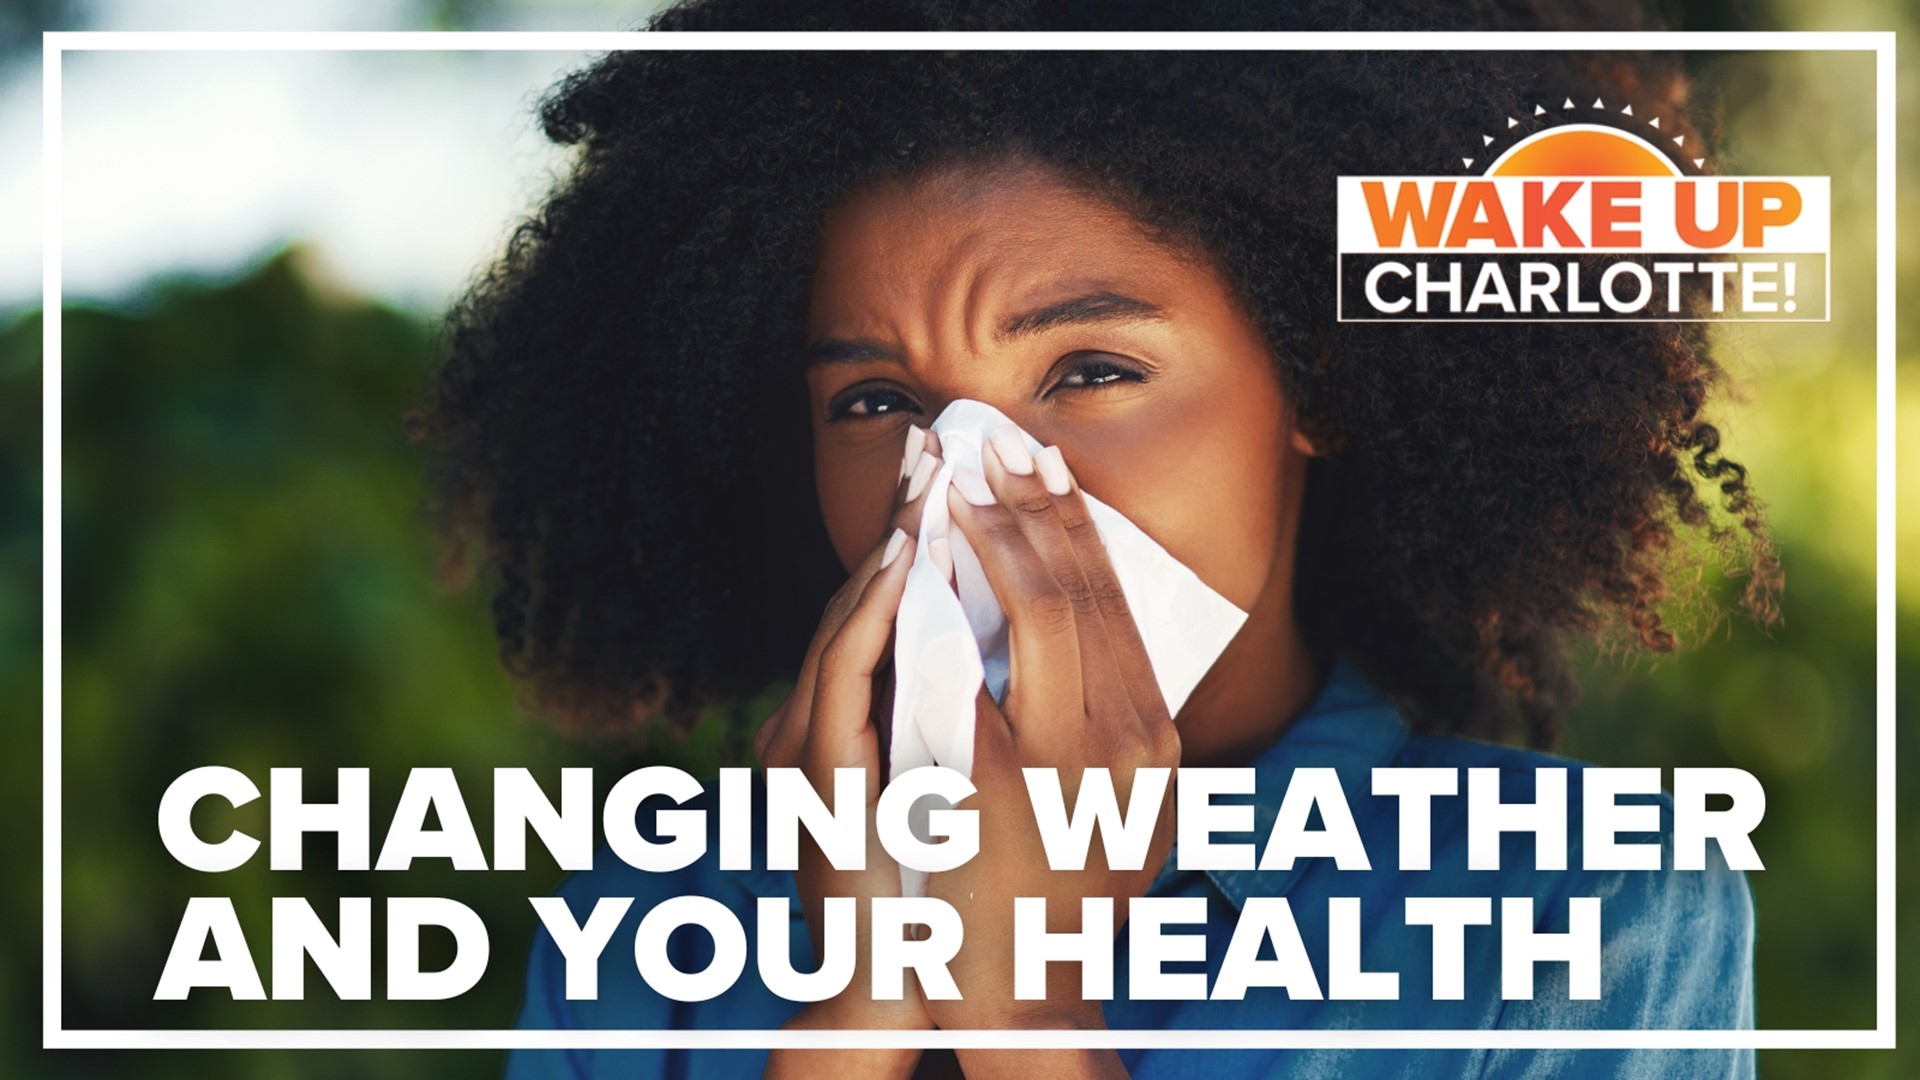 Allergies, infections and even more severe conditions like heart disease can all be impacted by wacky weather.